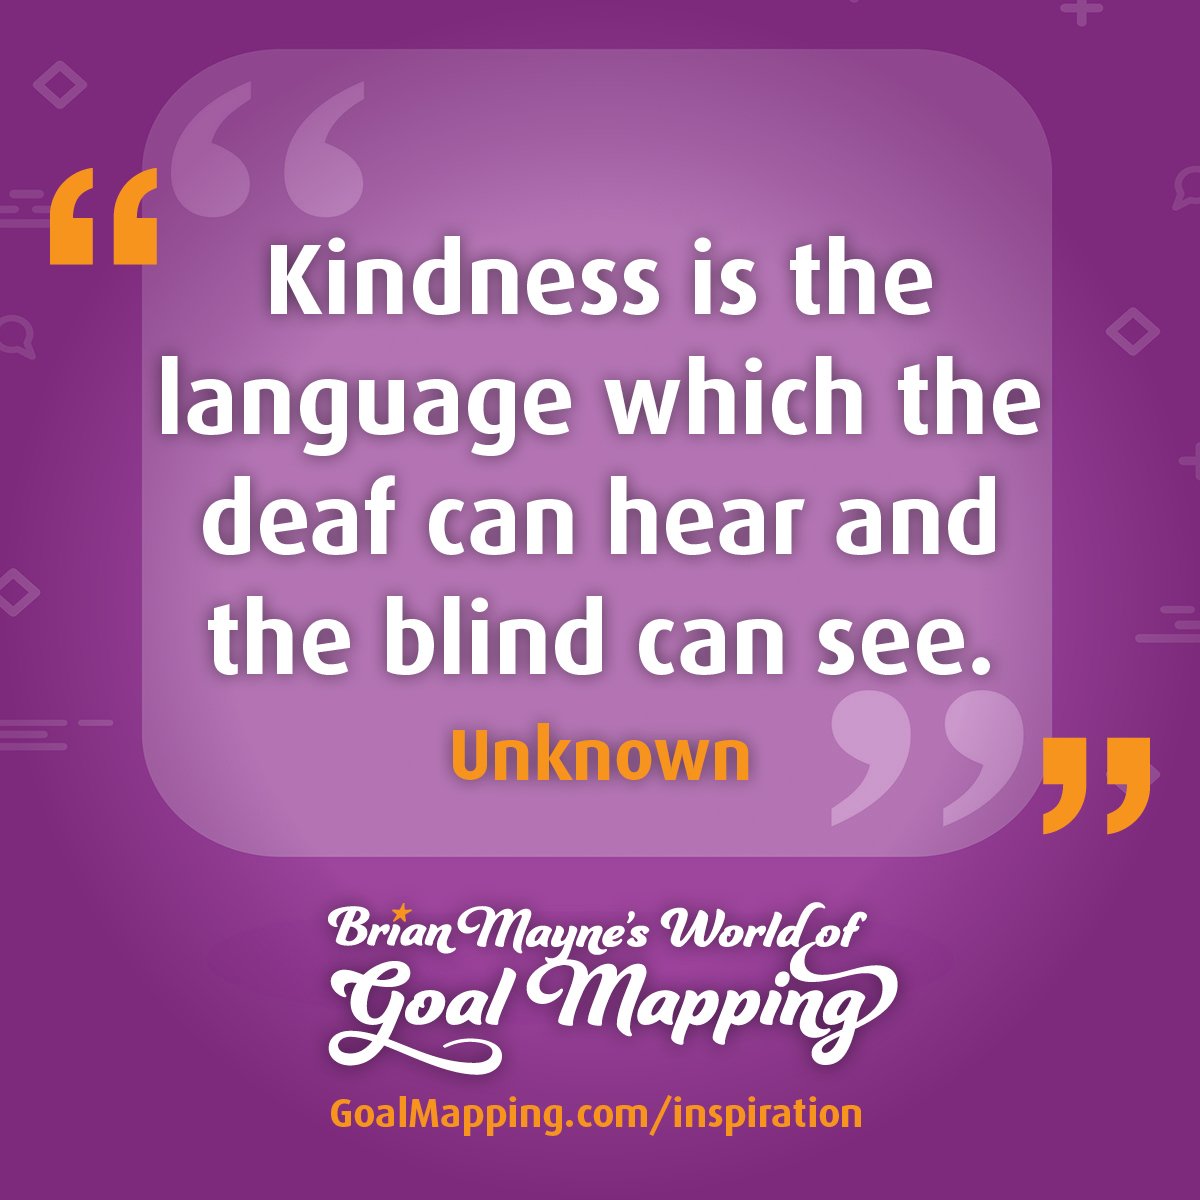 "Kindness is the language which the deaf can hear and the blind can see." Unknown